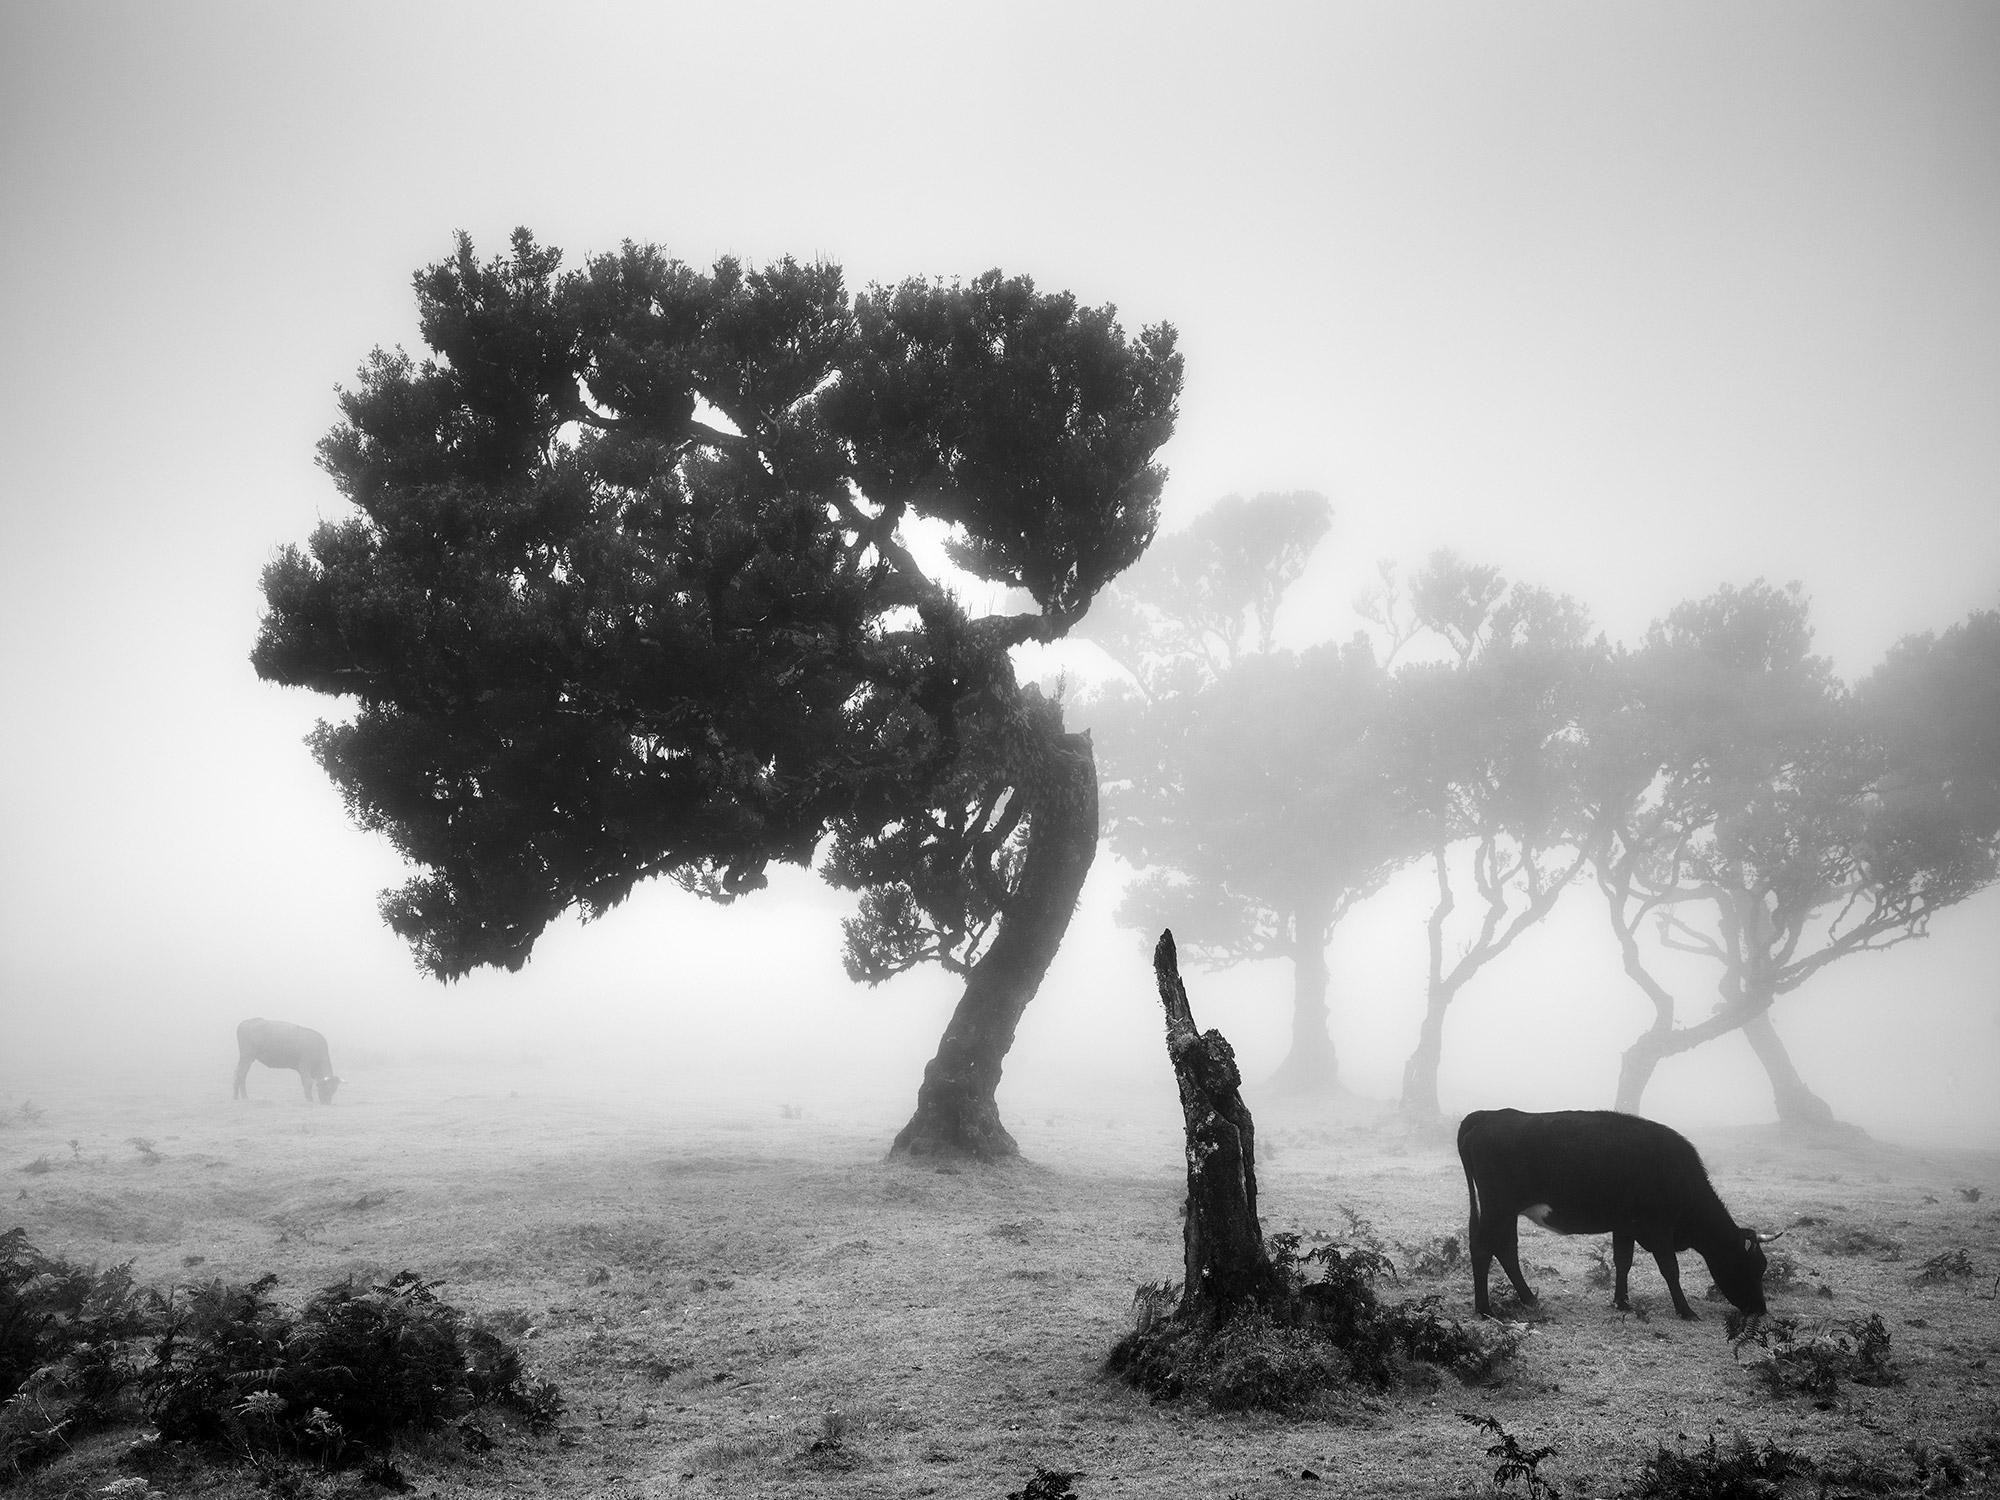 Gerald Berghammer Black and White Photograph - Cows on the foggy Pasture, misty forest, black and white photography, landscape